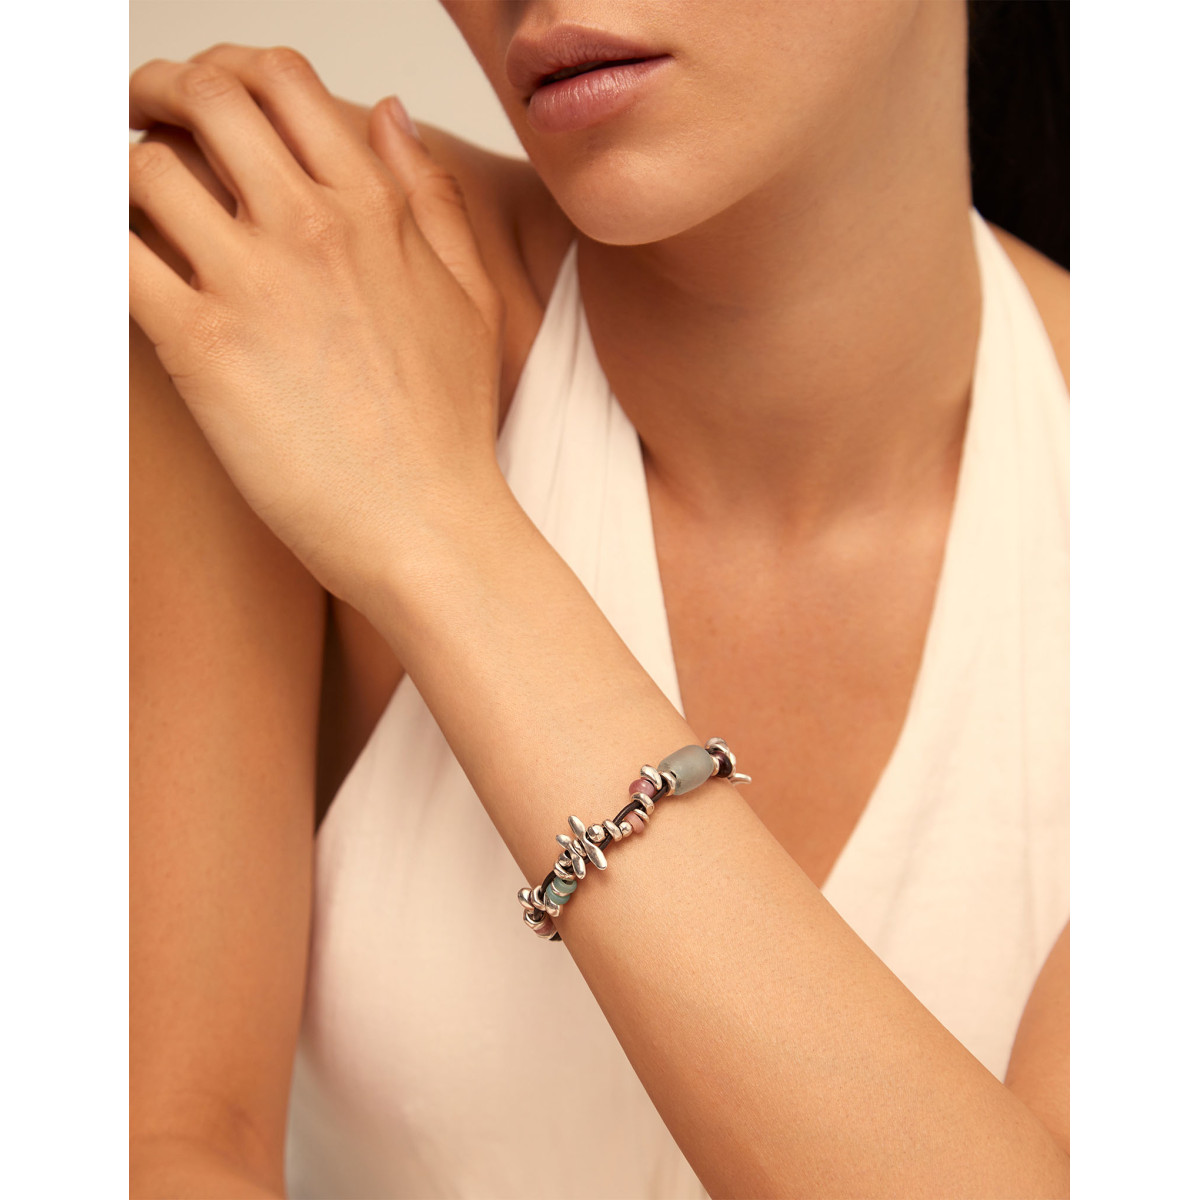 Pulsera Unode50  ¨Only Her¨